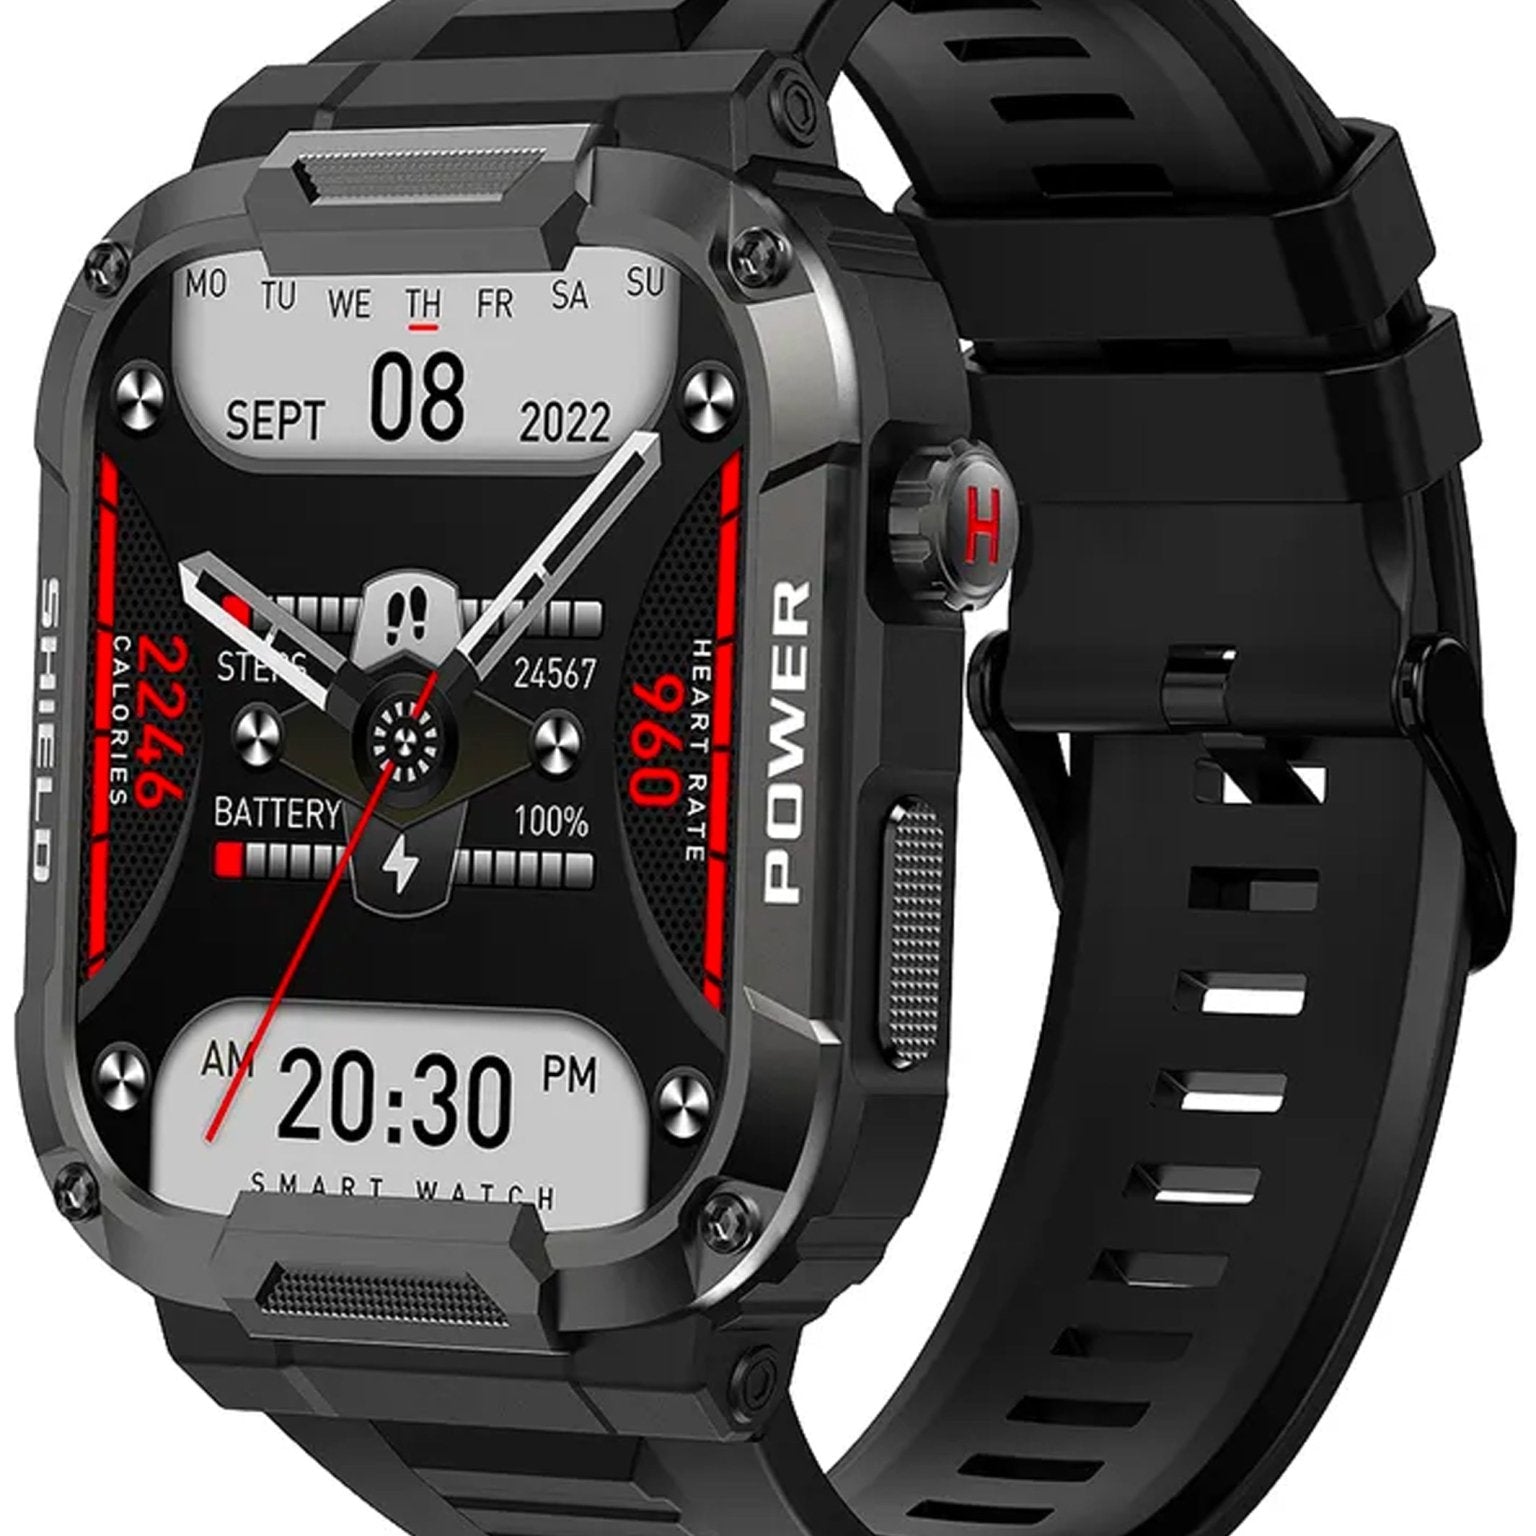 4elementsclothingTelsaTELSA UK - Smart Watch Waterproof IP68 military style mens Sports & fitness digital Watch with Touch Screen display, Fitness Watch, Heart Rate, Step counter Smart Watch for men IOS & AndroidWatch5060976970320